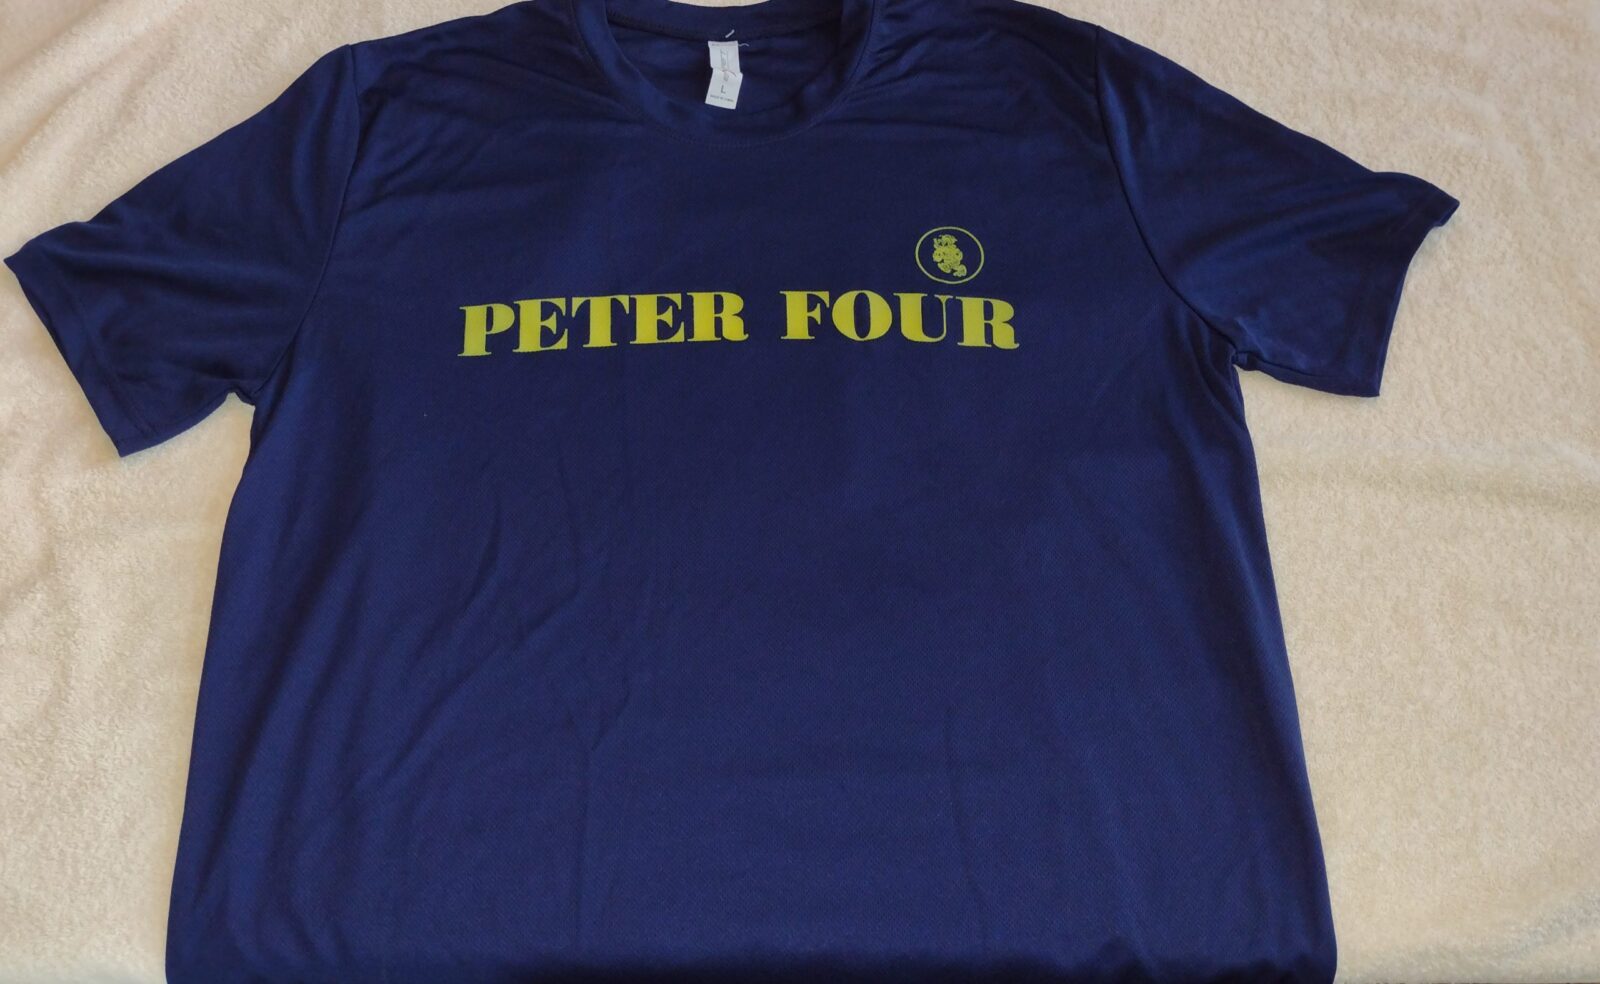 Peter Four shirt for sale